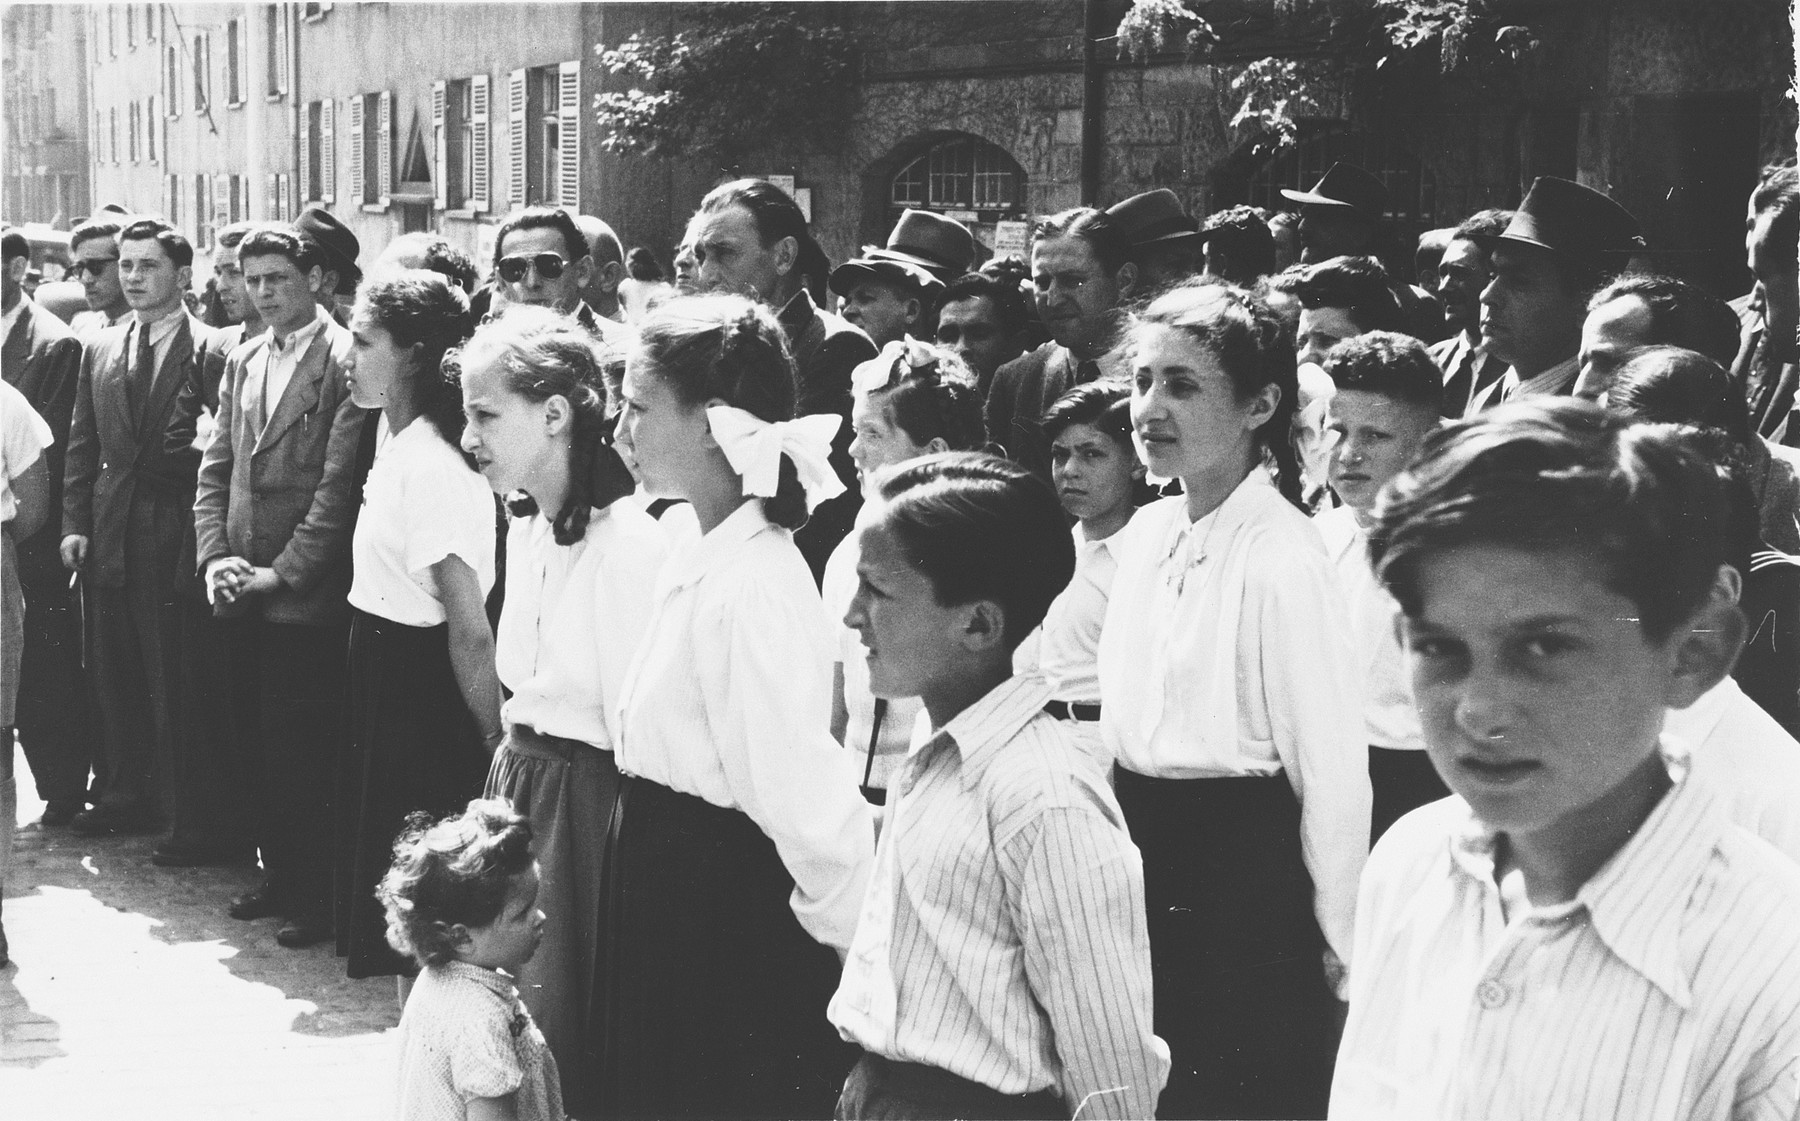 School children gather for a ceremony marking Israel's independence in the Stuttgart displaced persons' camp.